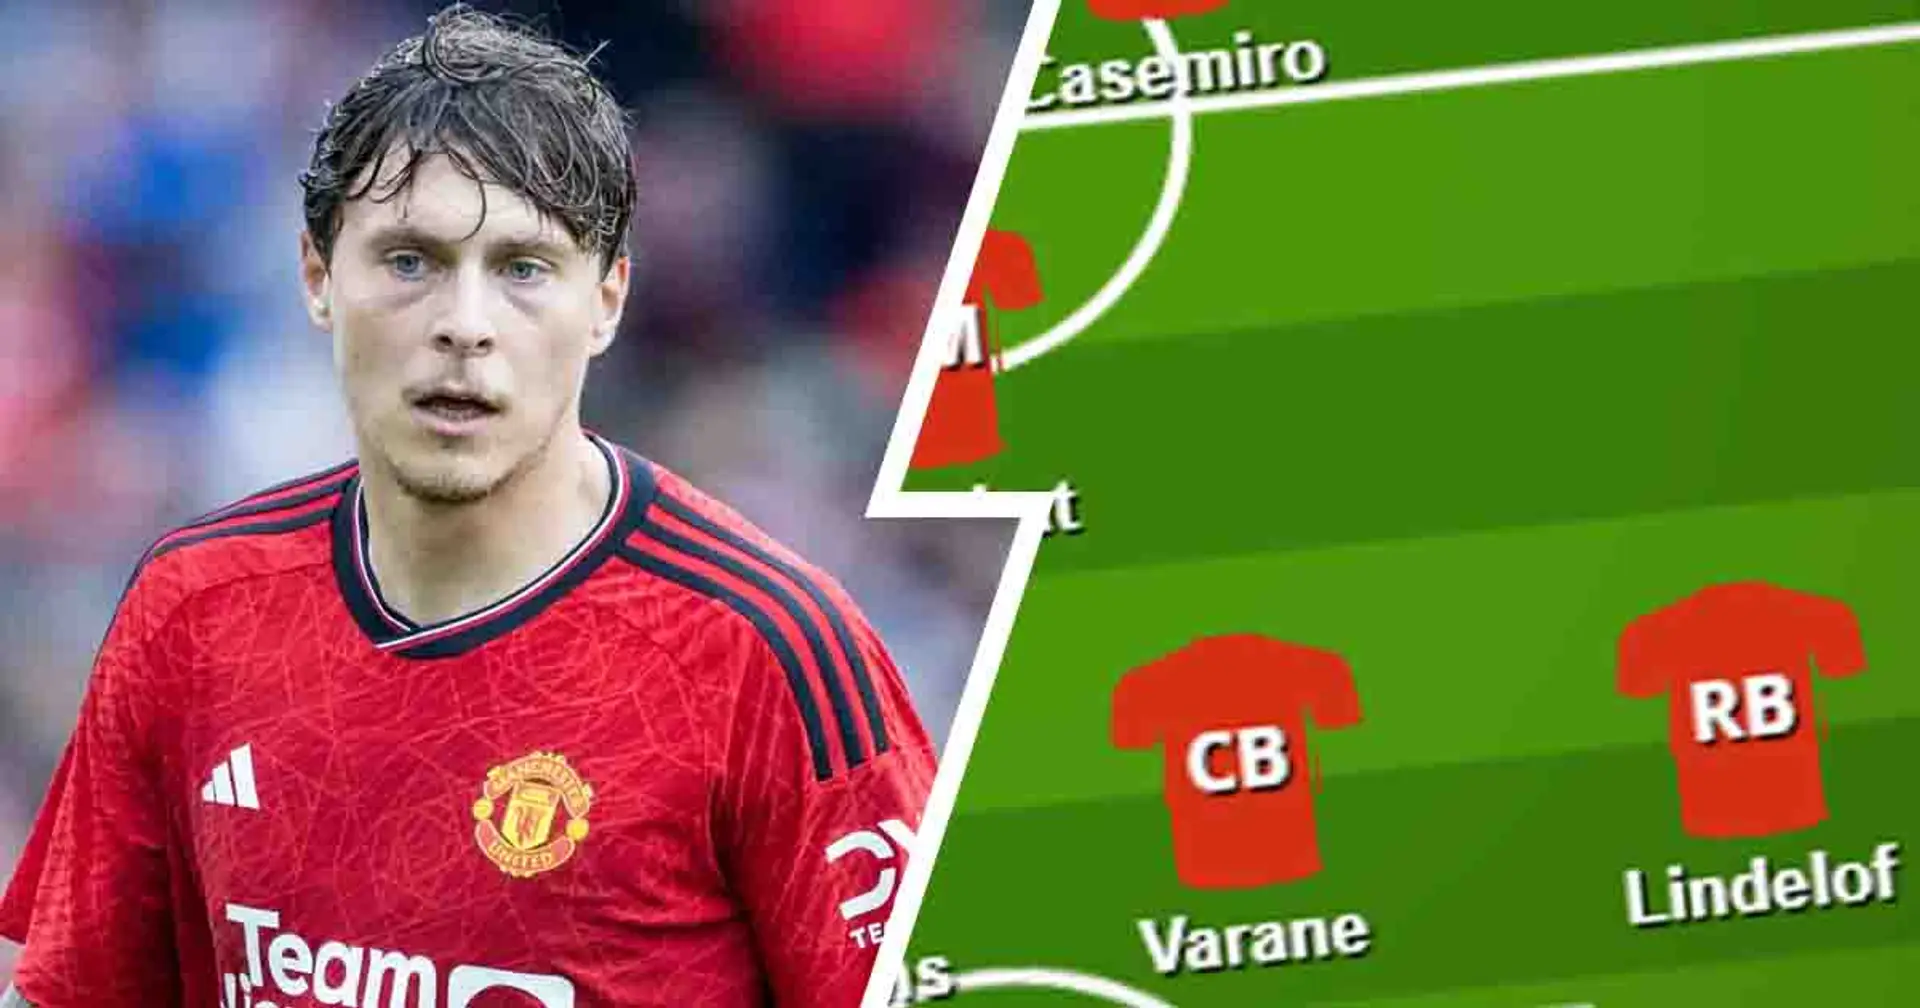 Man United fans name backline for Brentford clash that involves moving Lindelof to RB - shown in lineup